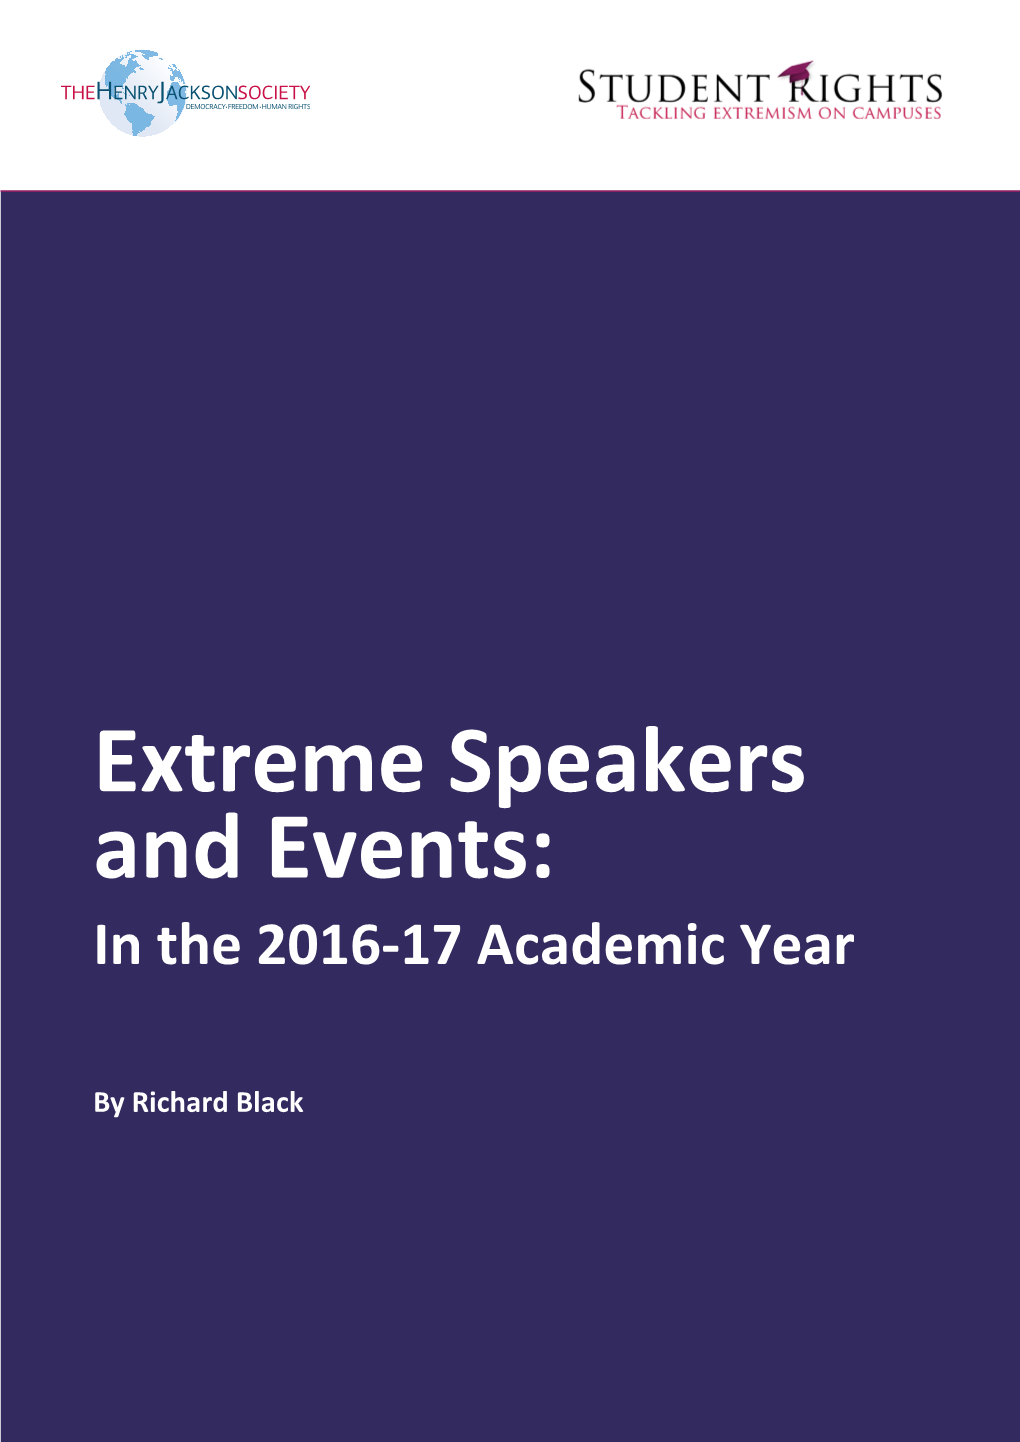 Extreme Speakers and Events: in the 2016-17 Academic Year